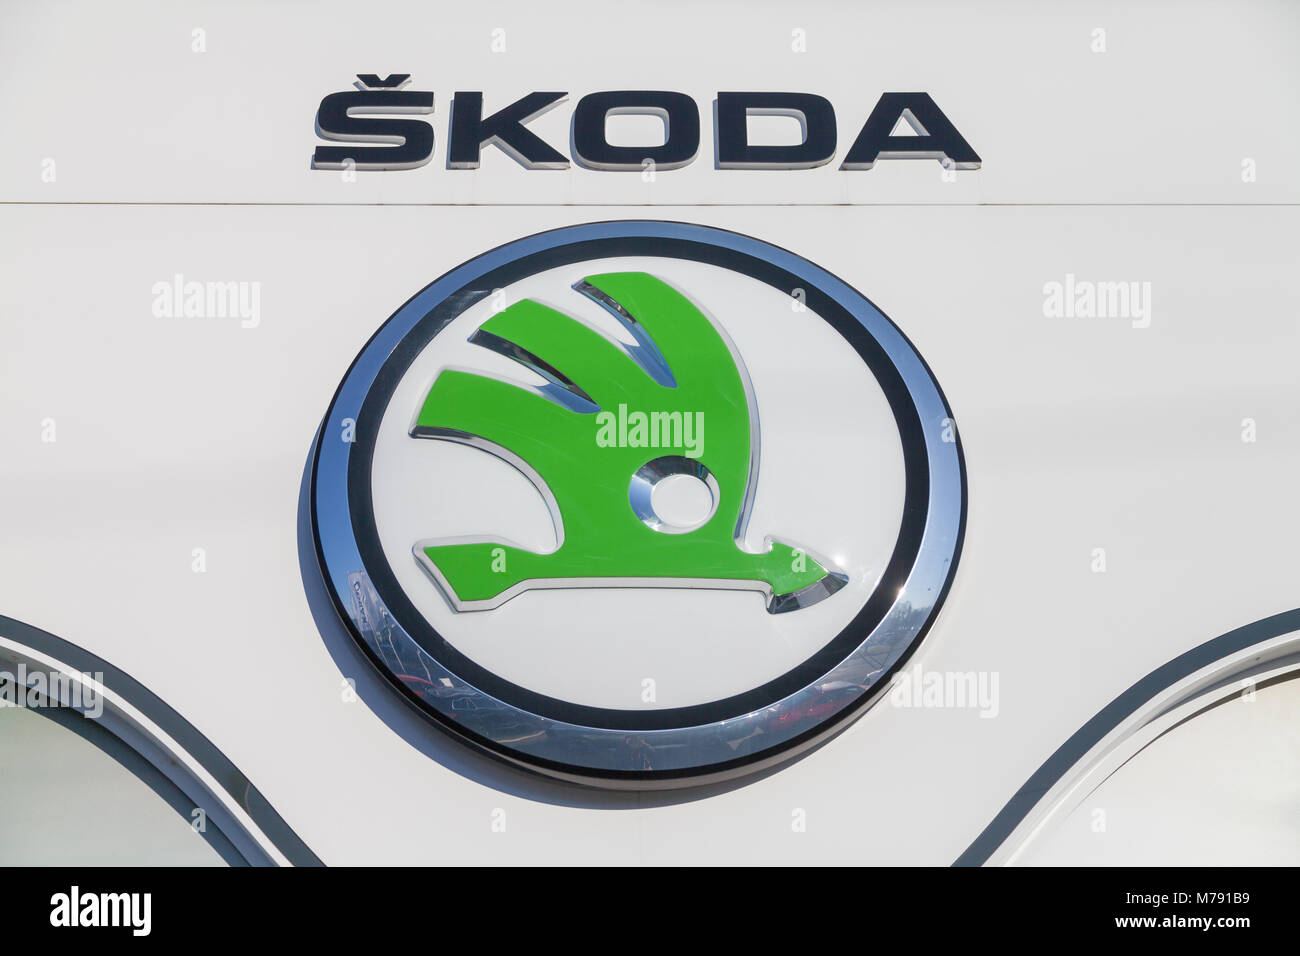 NUERNBERG / GERMANY - MARCH 4, 2018: Skoda logo on a car dealer in Germany. Skoda is a Czech automobile manufacturer founded in 1895 as Laurin and Kle Stock Photo